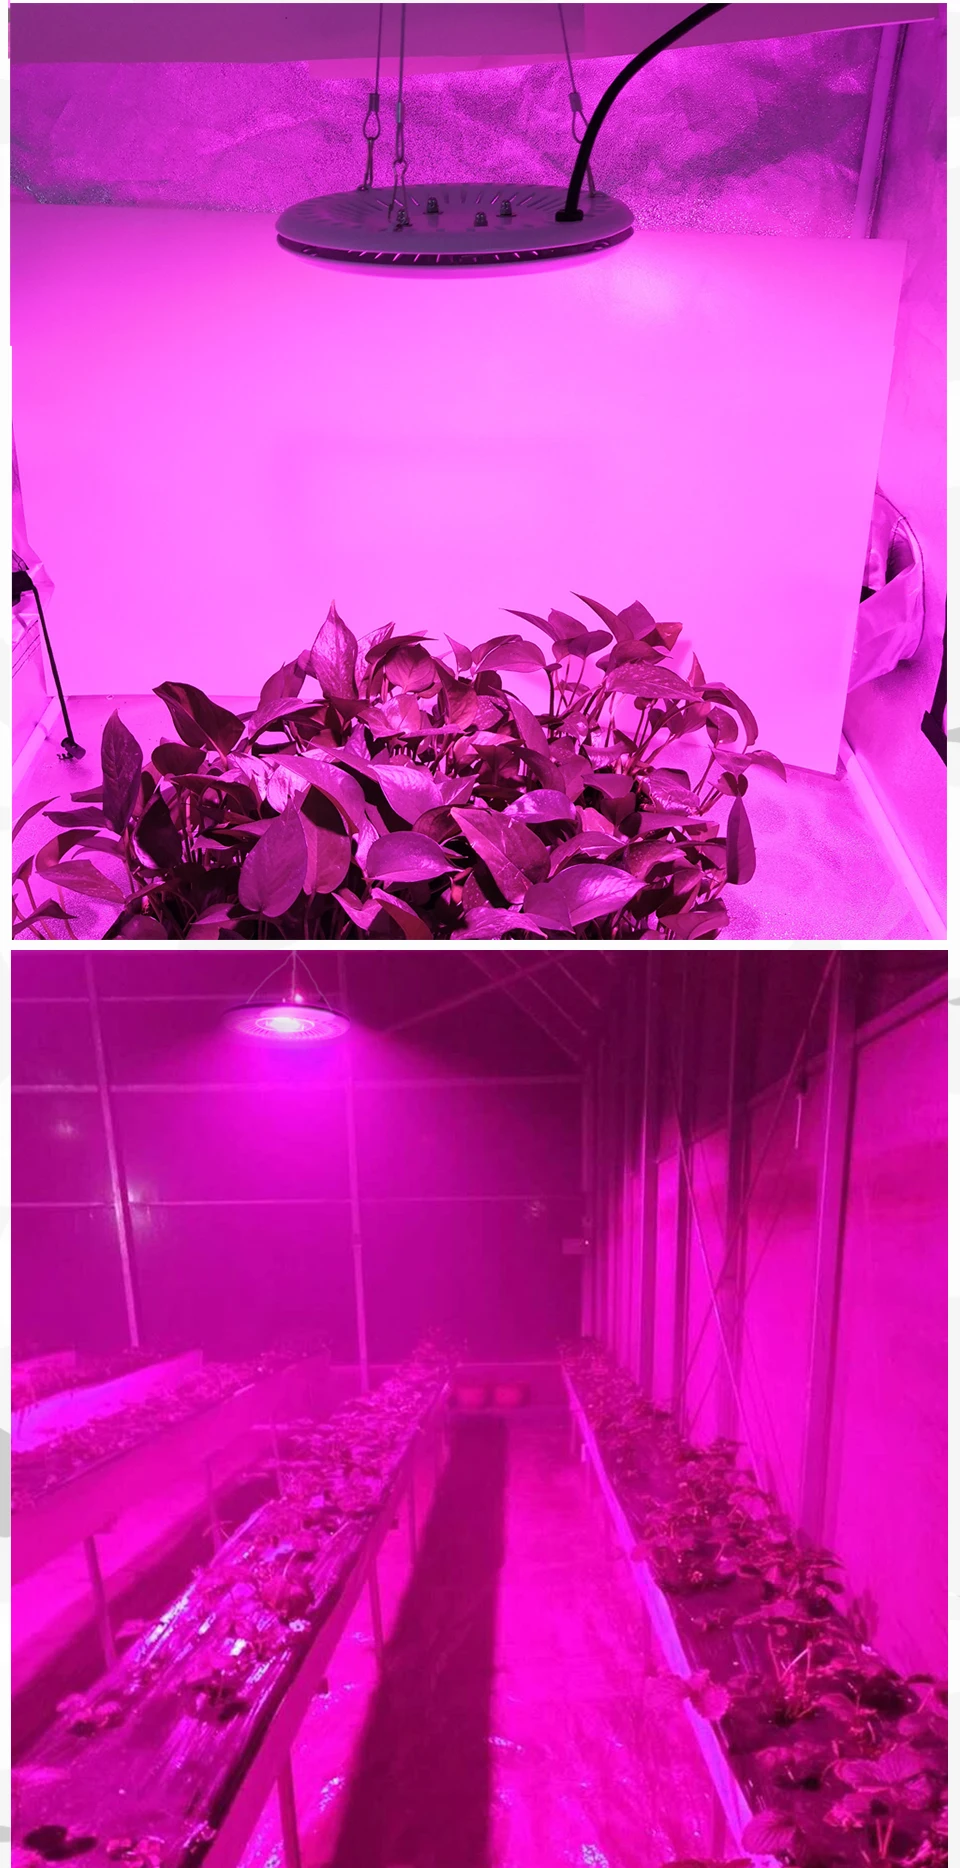 1-Fitolamp-LED-Grow-Light-Phyto-Lamp-For-Plants-Indoor-Plant-Lights-Flower-Fitolampy-Garden-Fito-Led-Greenhouse-Vegs-Grow-Tent-Box_07